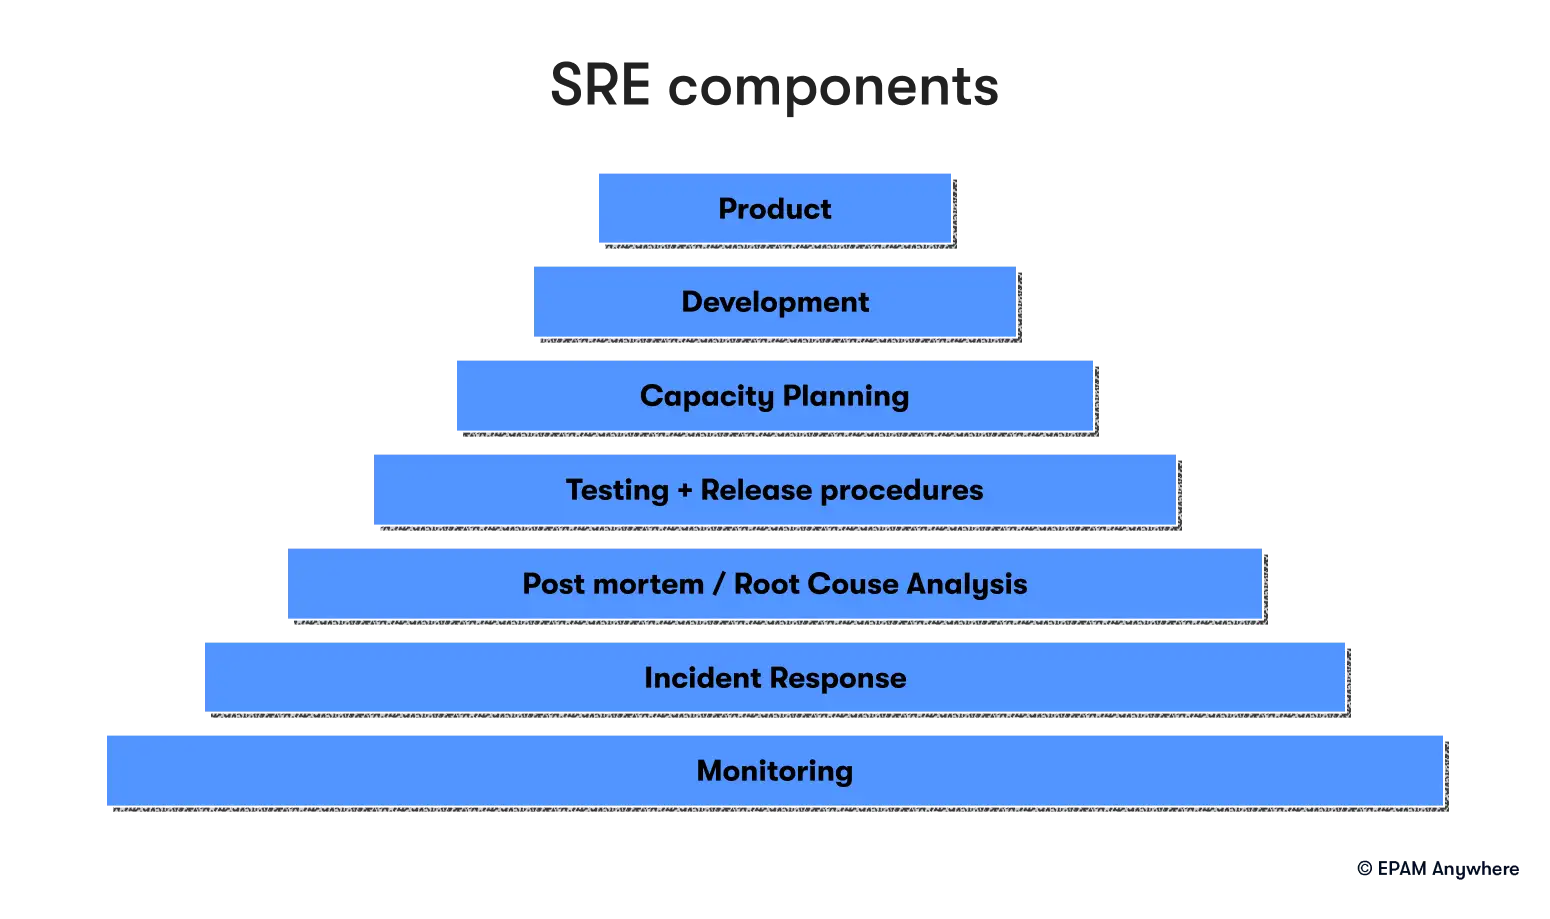 A pyramid with the key SRE components